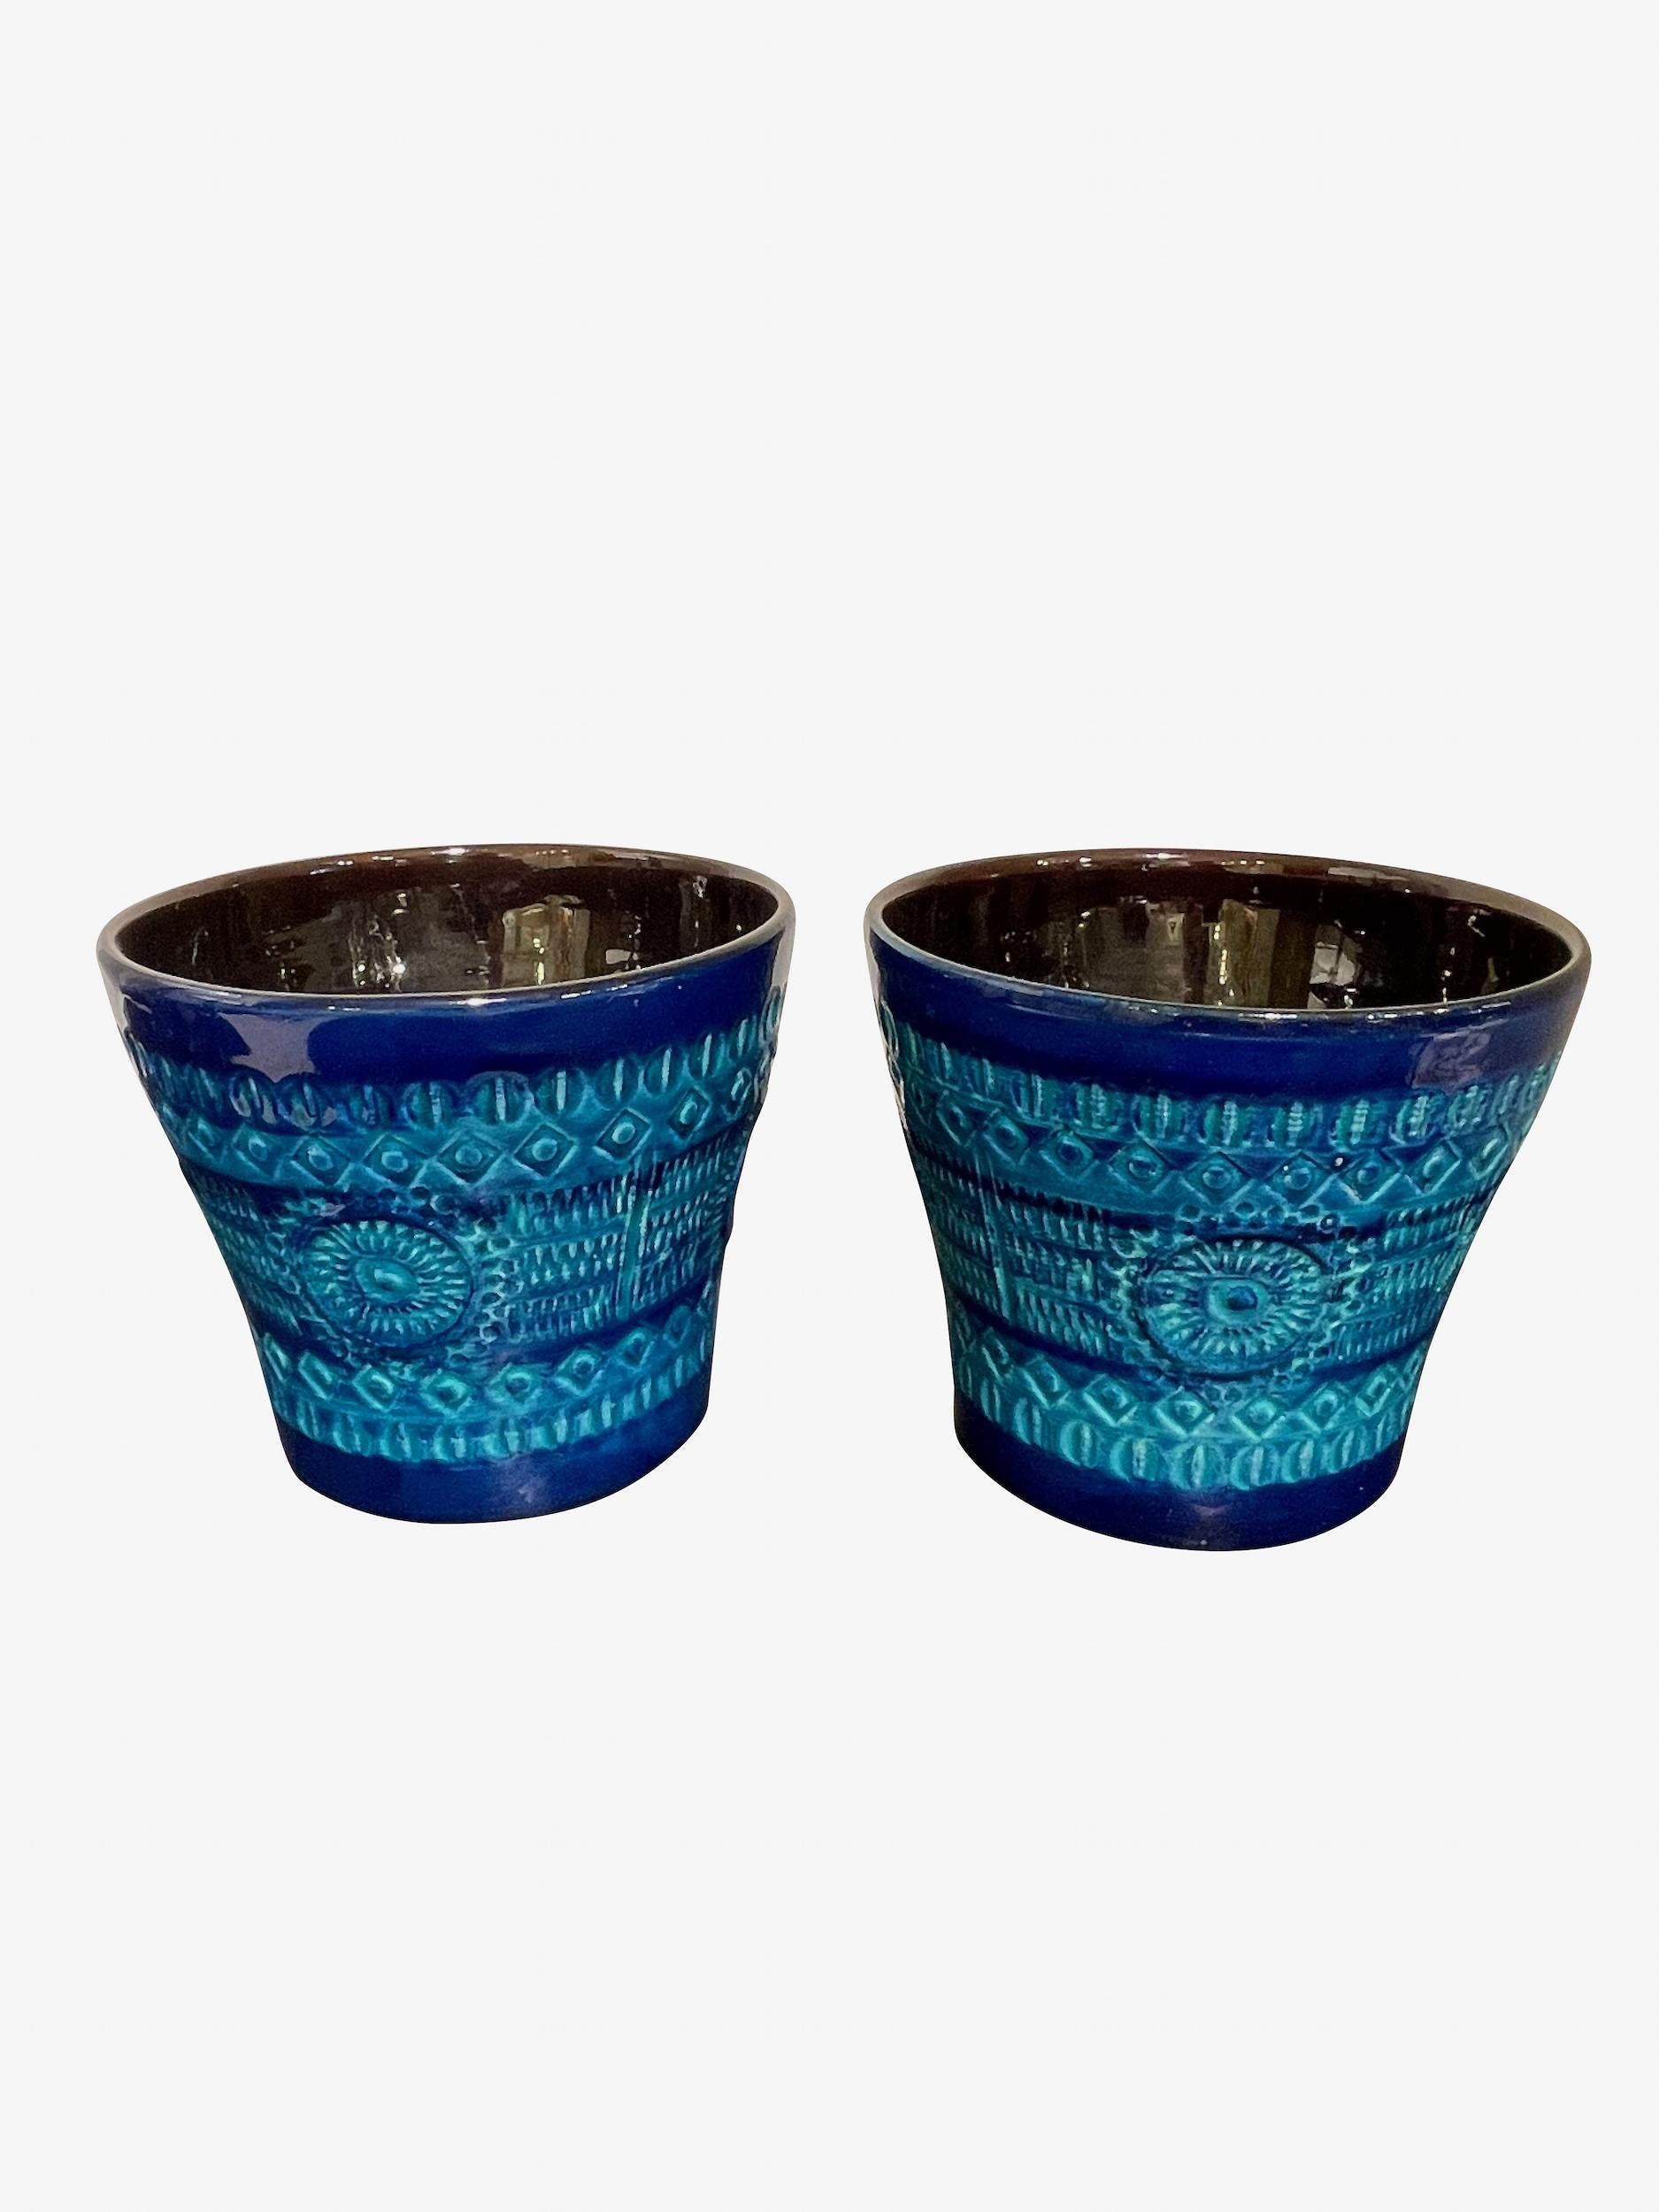 Blue Shades Geometric Design Pot, France, Mid Century In Good Condition For Sale In New York, NY